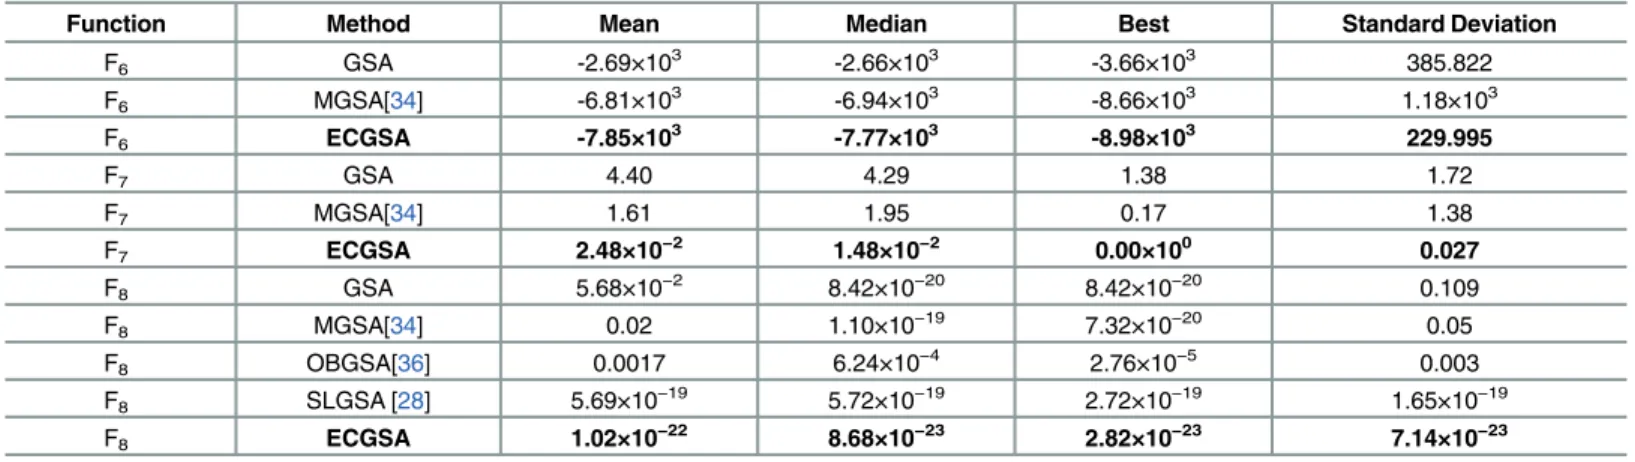 Table 3. Minimization result of the unimodal benchmark functions in Table 1.